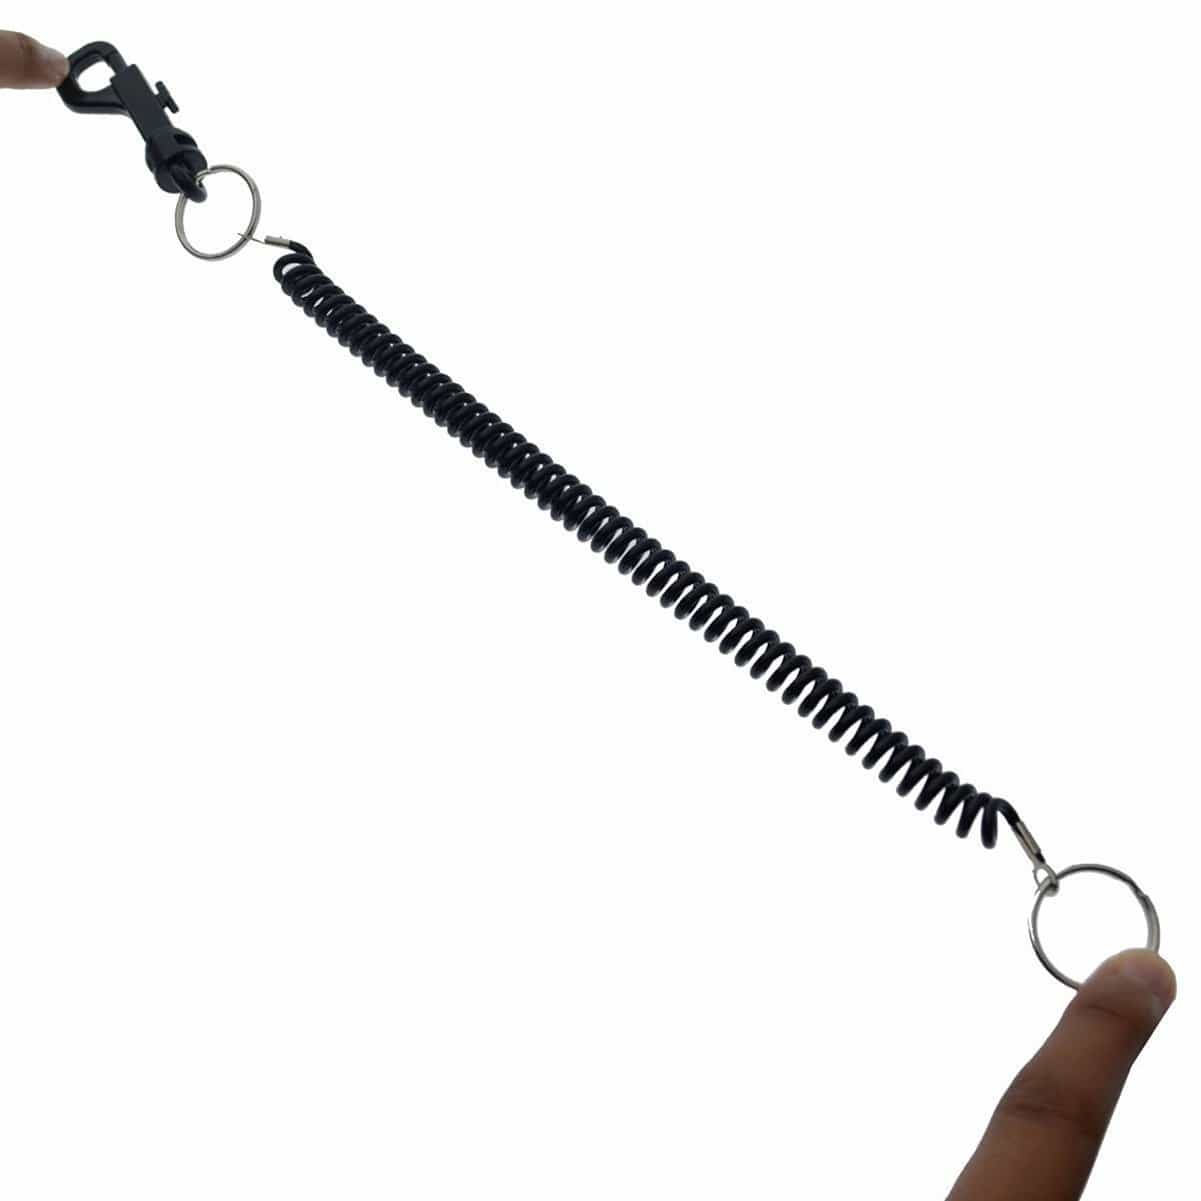 Bungee Coil Keychain Lanyard with Elastic Cord at SpecialistID.com